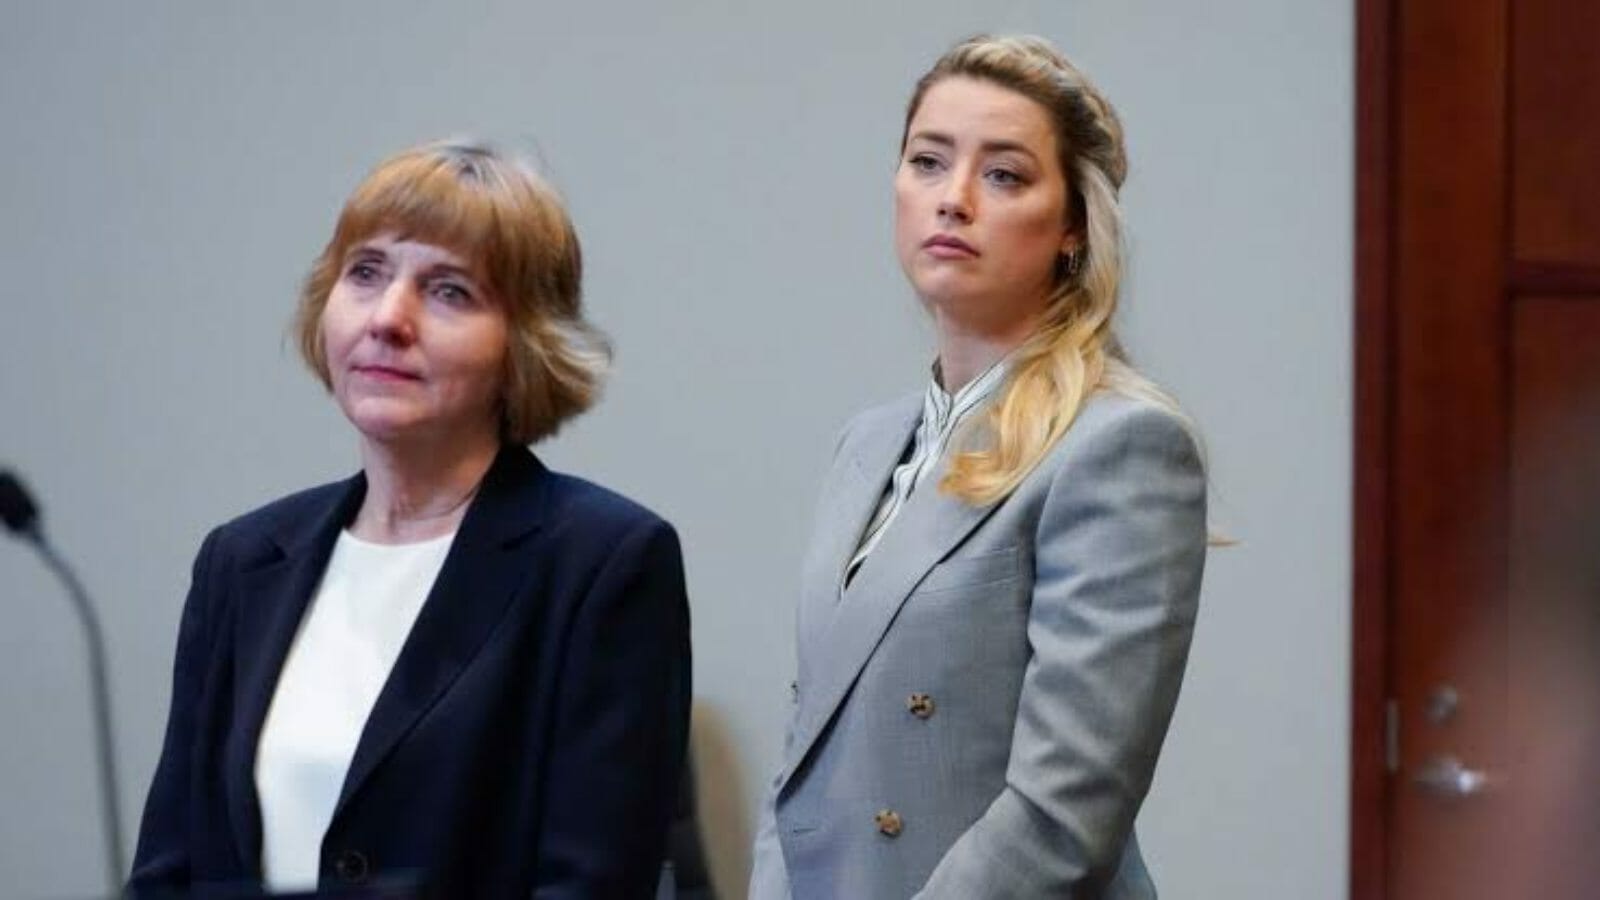 Amber Heard and her attorney